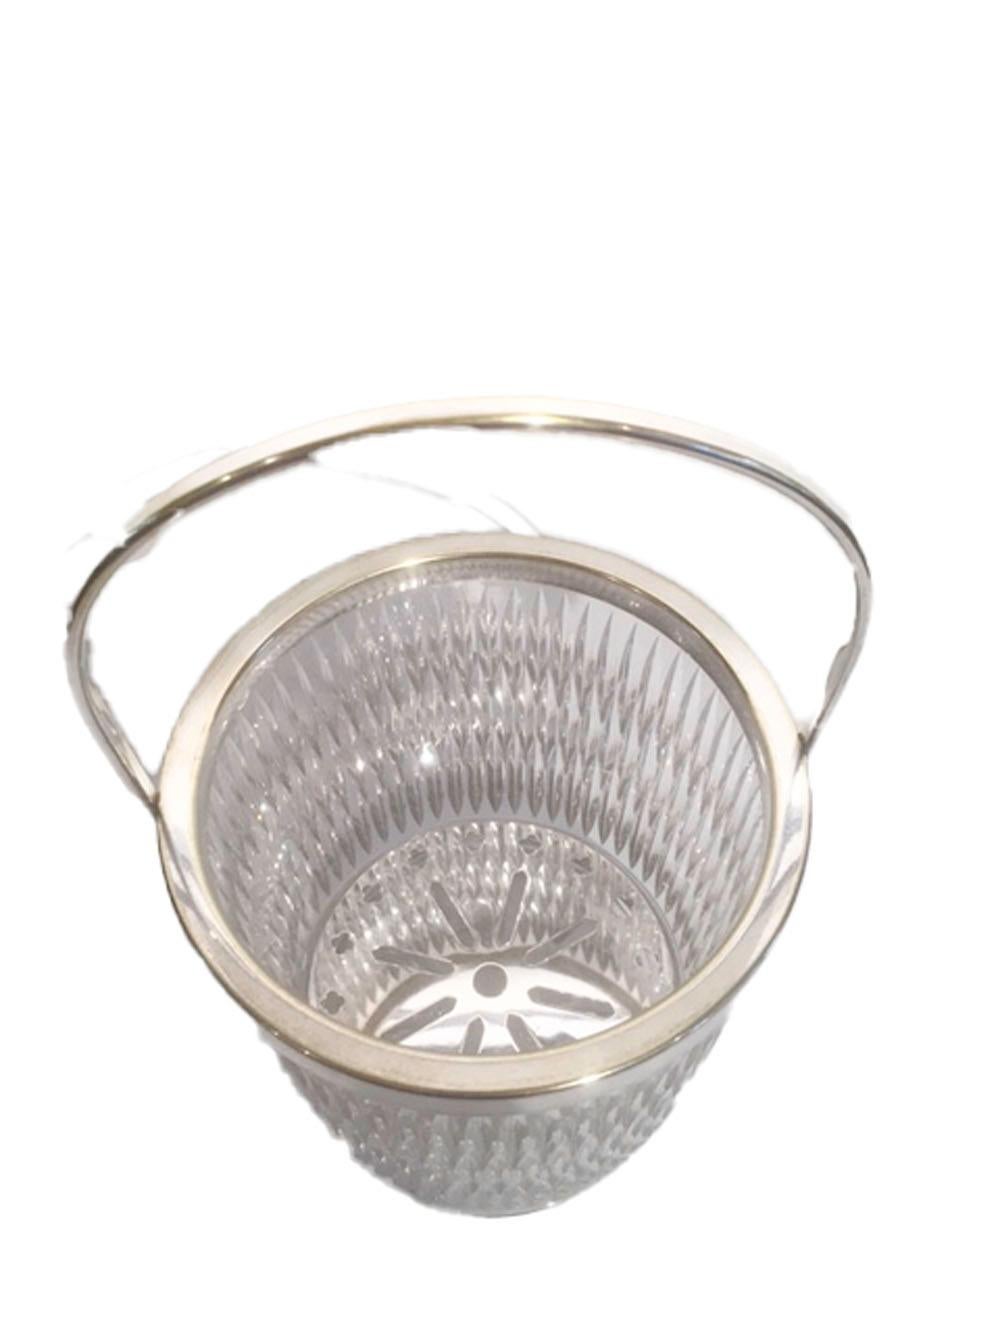 Mid 20th century heavy cut glass ice bucket of with silver plate rim and handle. The exterior is cut with three rows of closely spaced vertical lines creating an optical effect above a row of ovoid cuts at the base, the bottom is finished with a